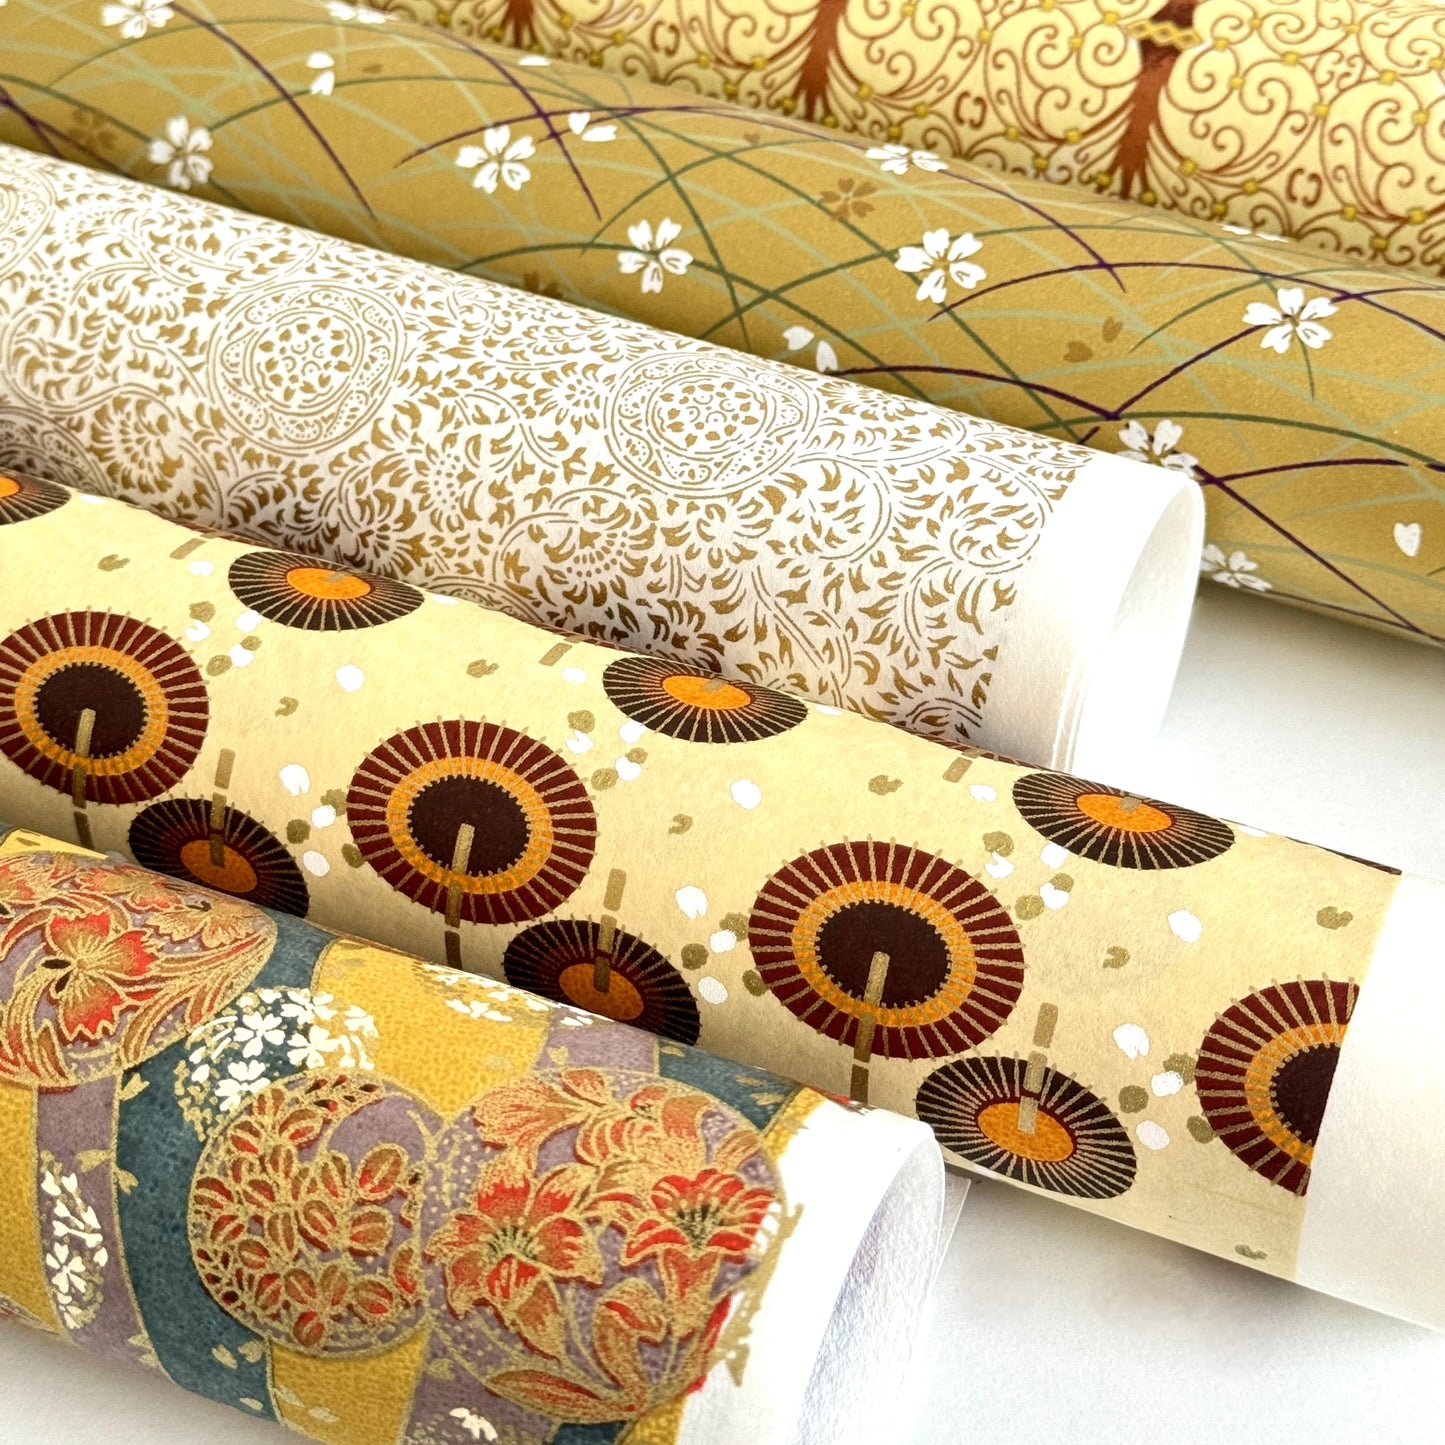 Japanese silkscreen chiyogami paper with a brown and orange umbrella pattern on a buttermilk backdrop, rolled with other designs